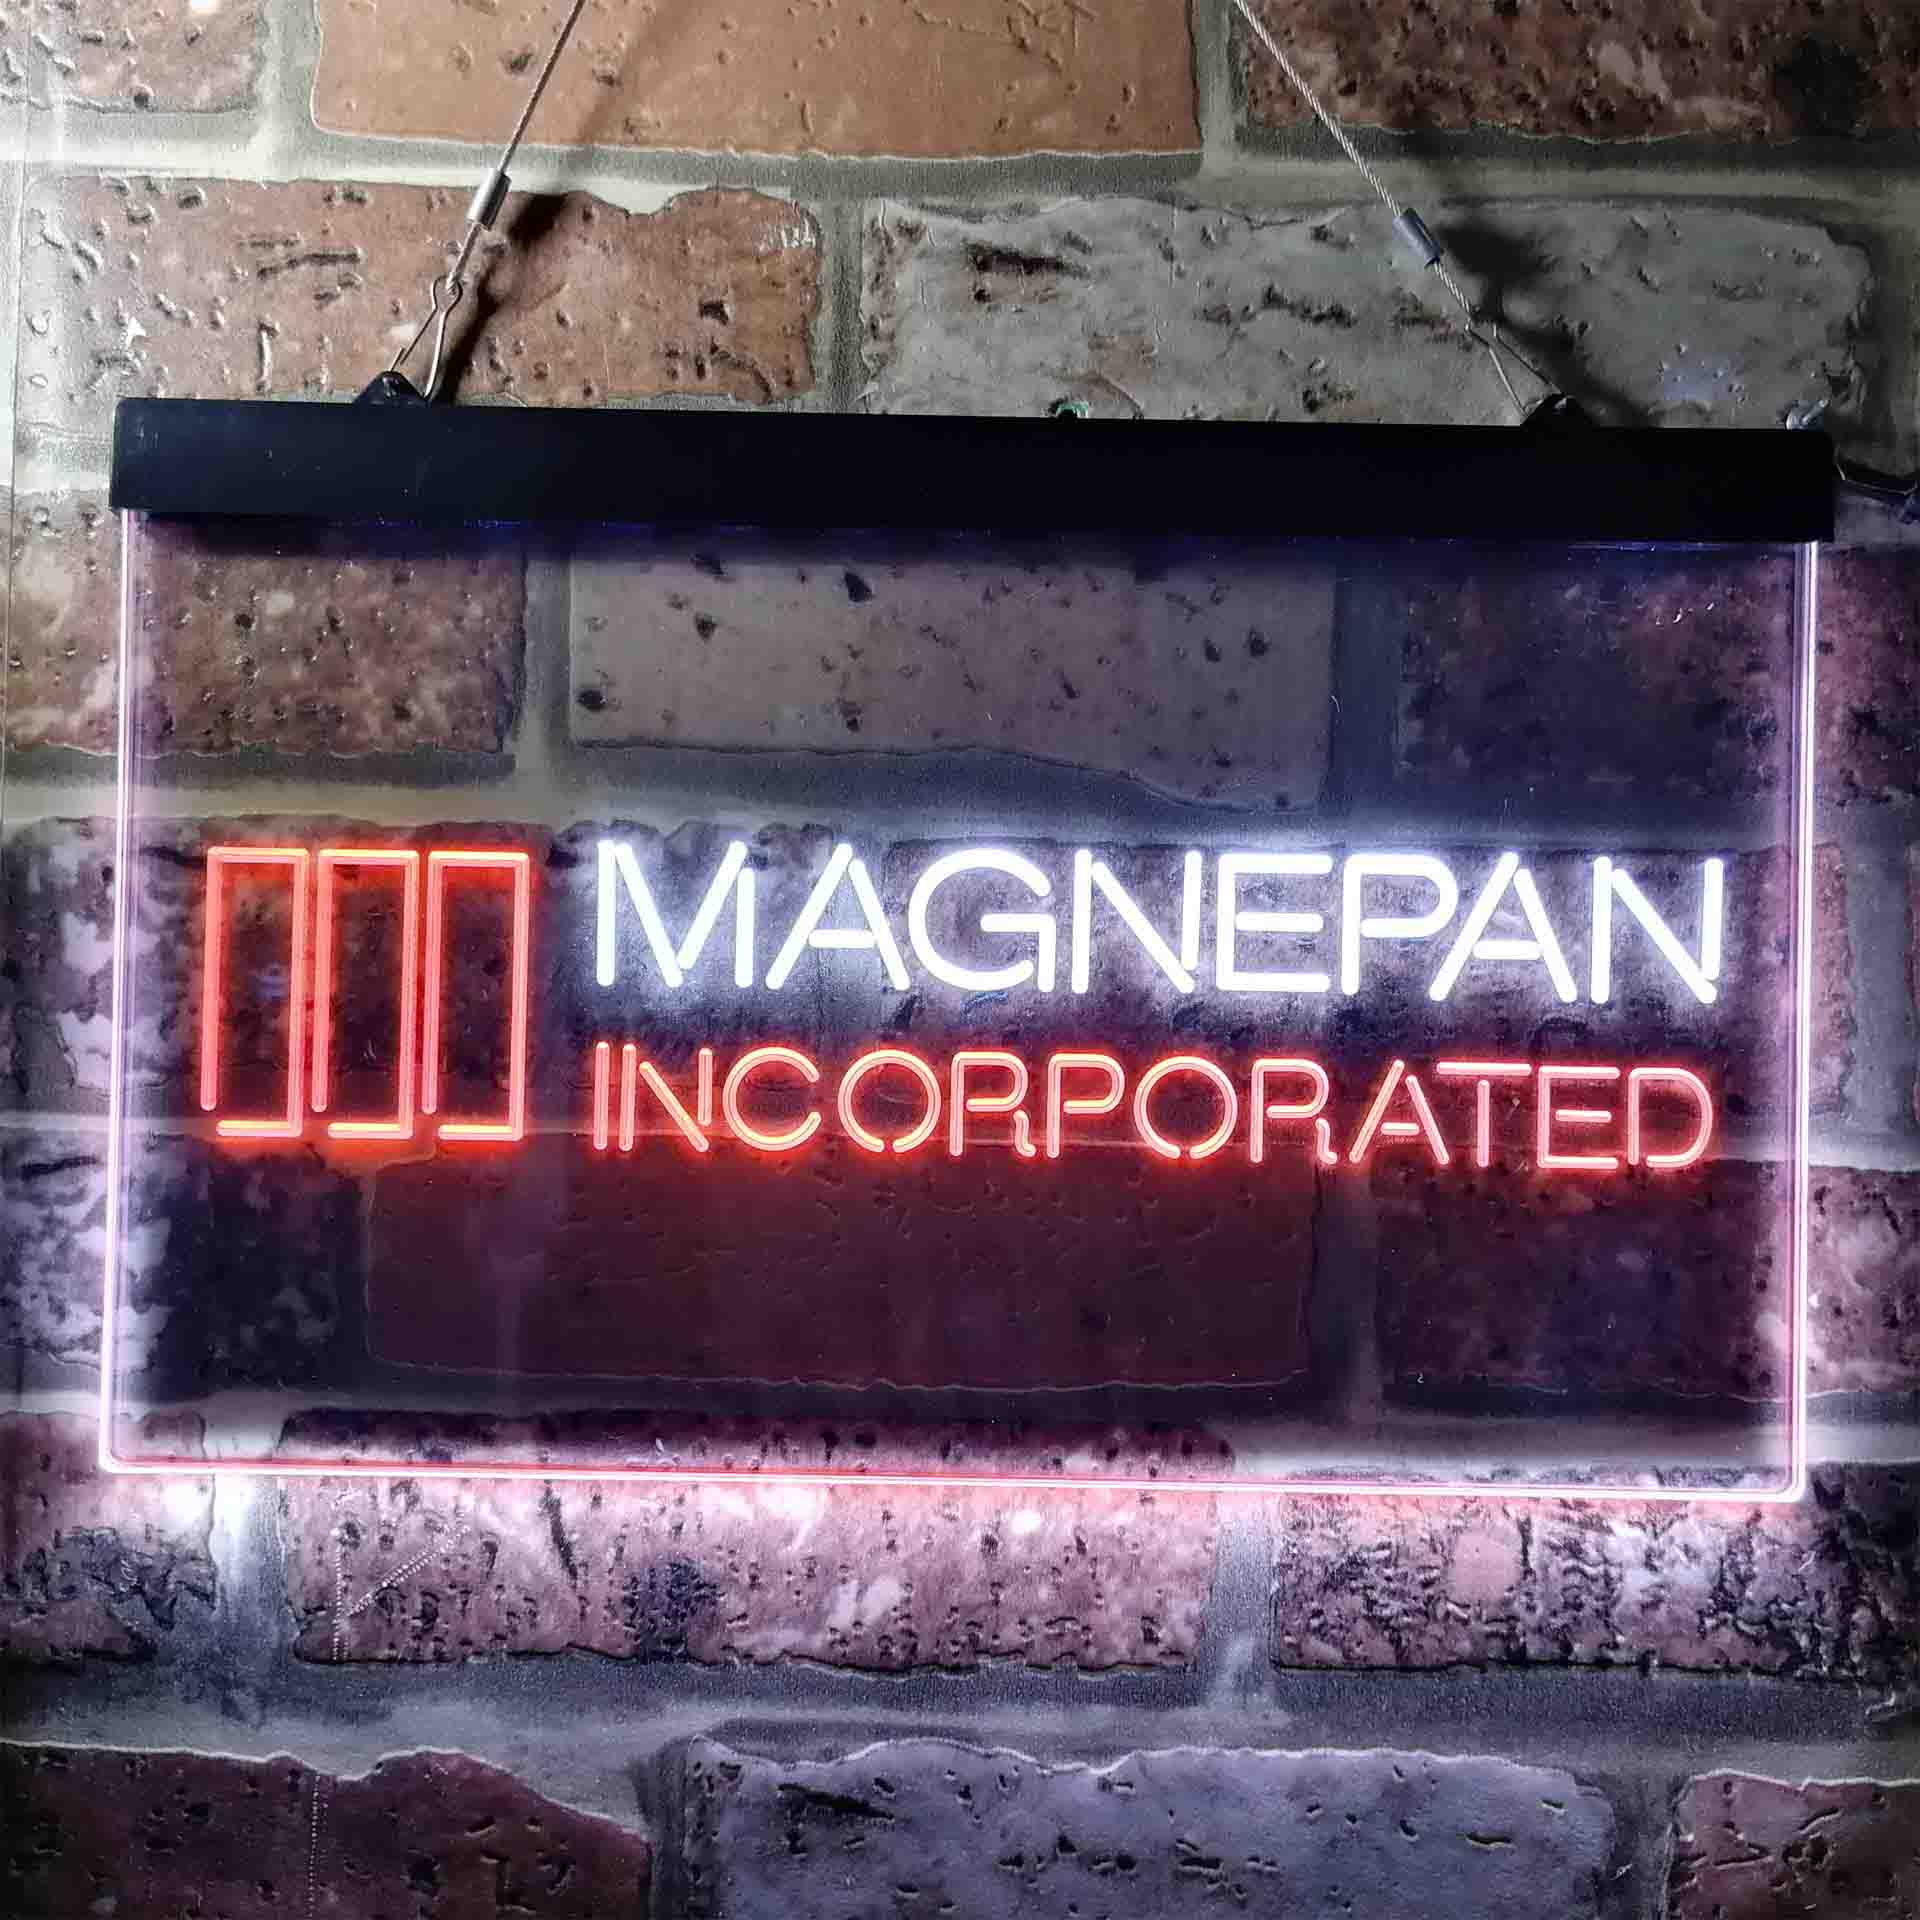 Magnepan Incorporated Audio Home Theater Cinema Neon LED Sign